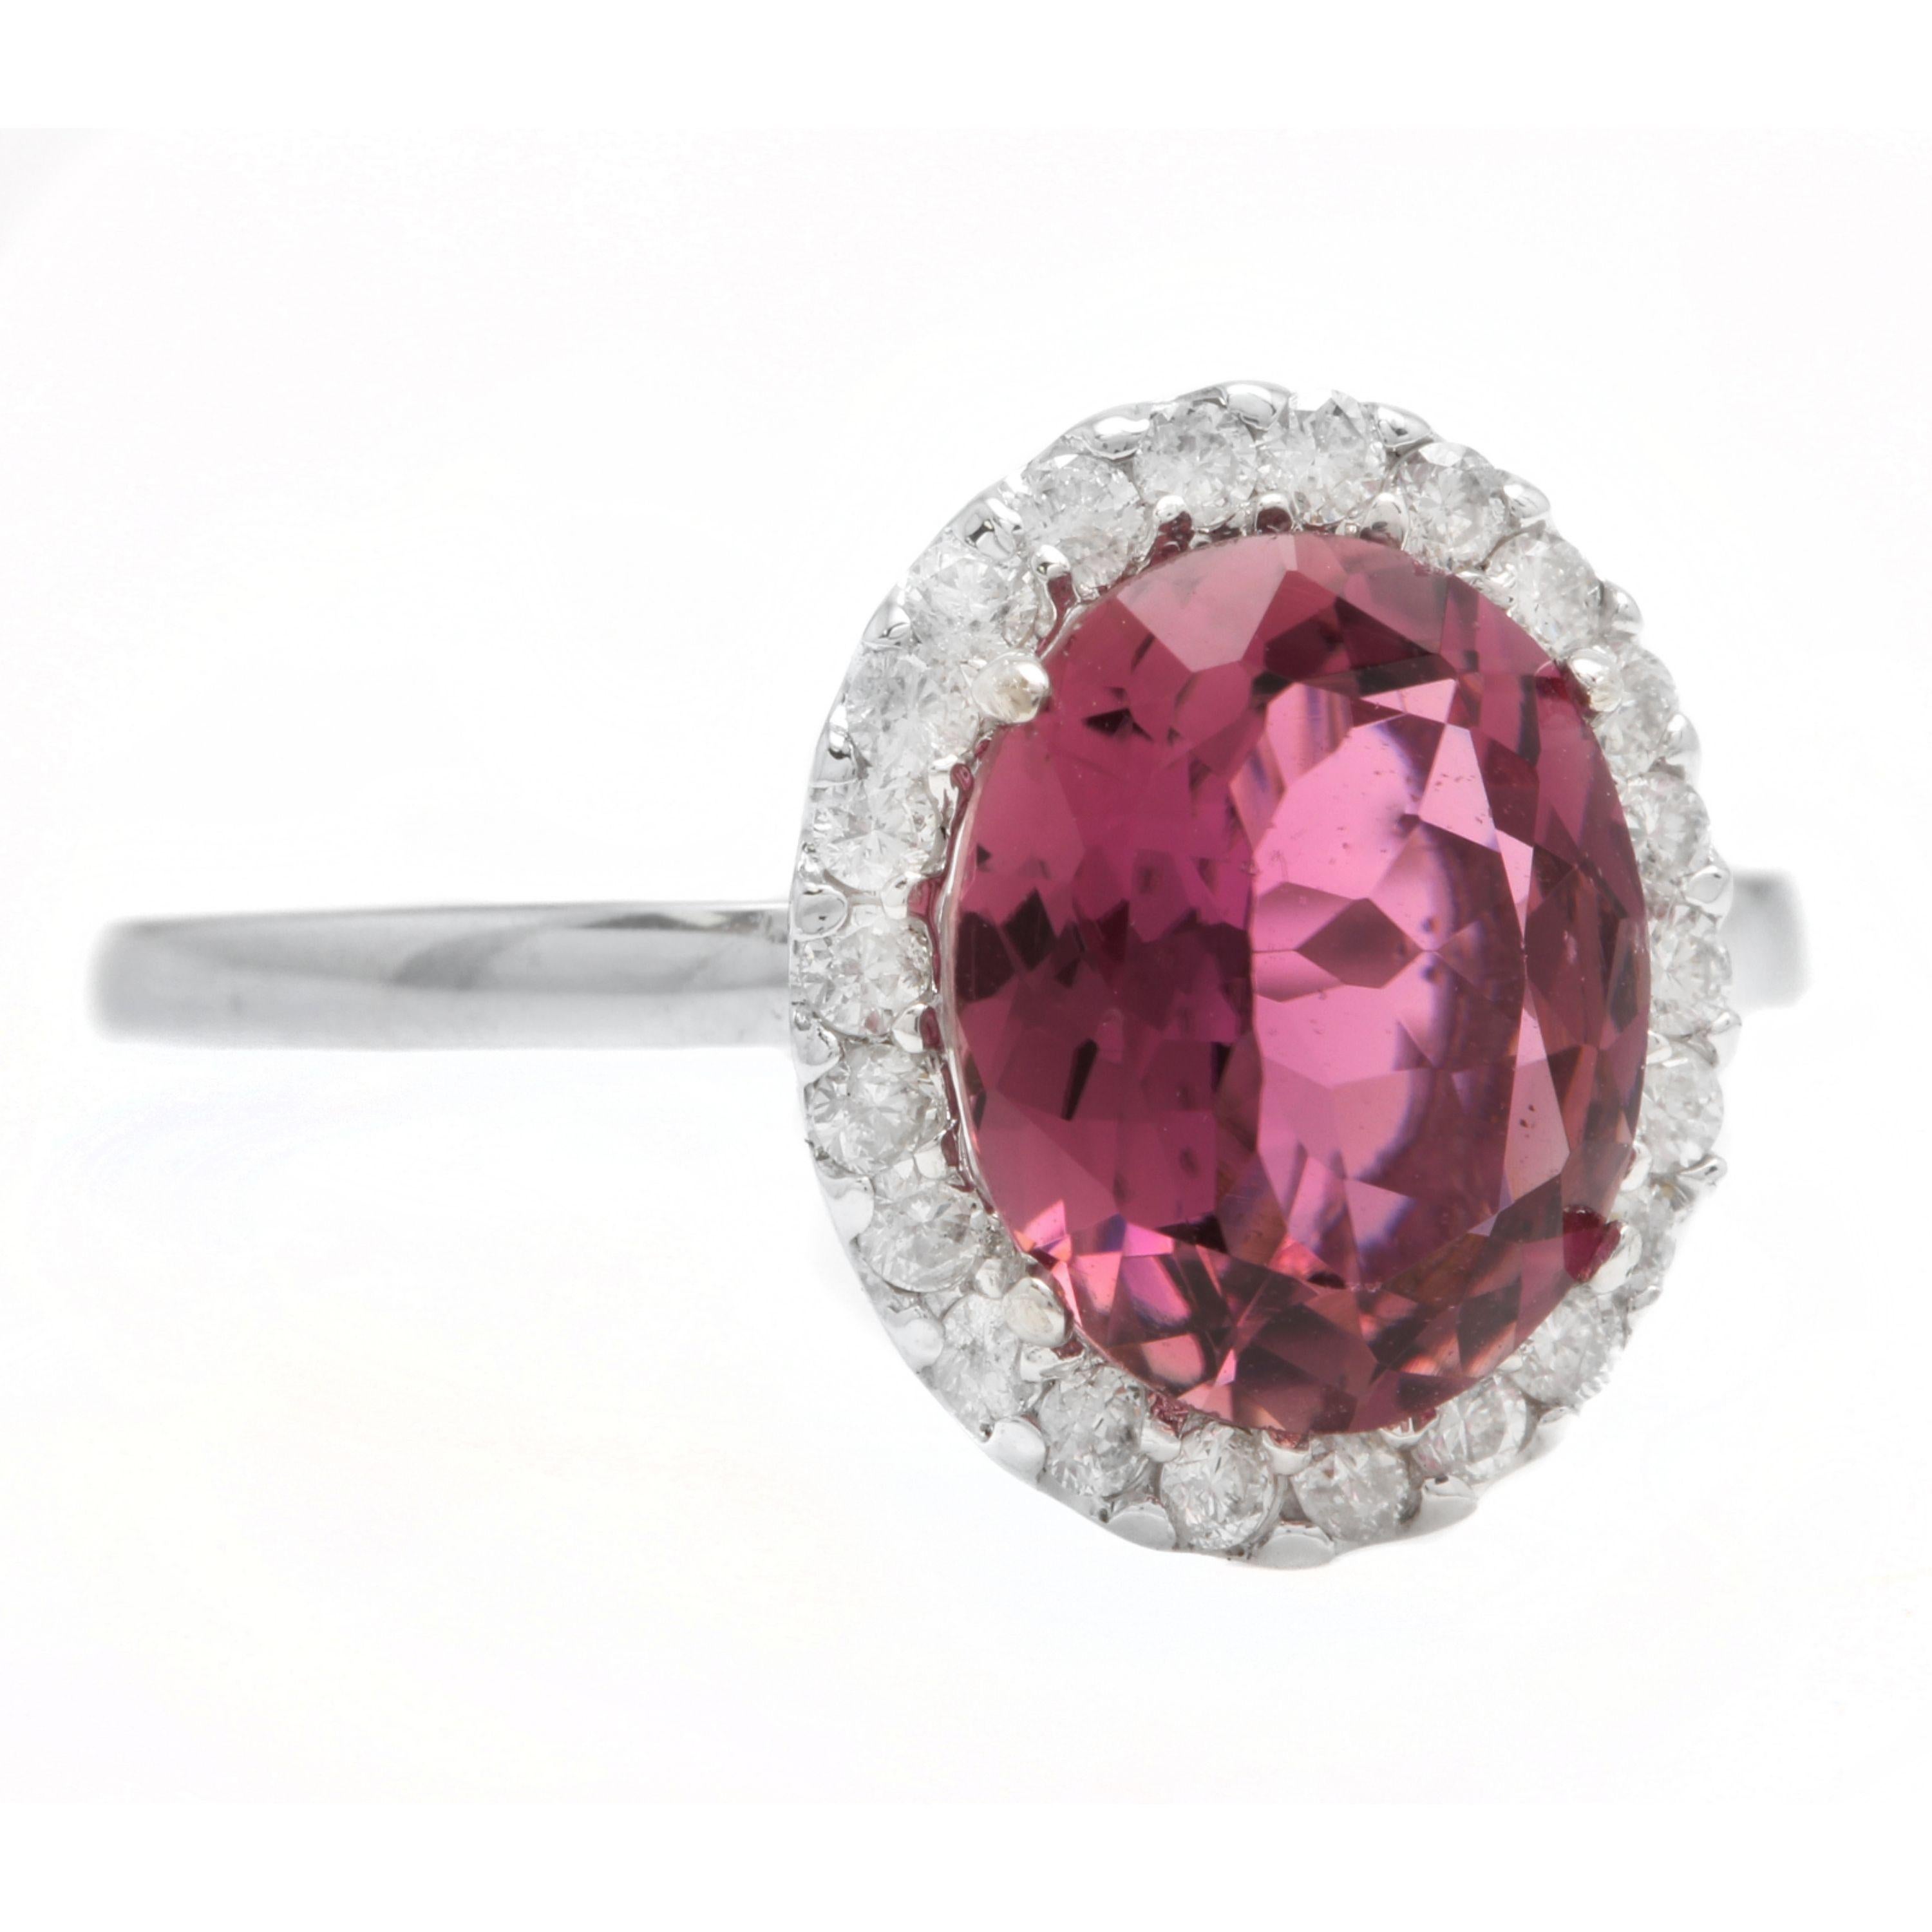 2.35 Carats Natural Very Nice Looking Tourmaline and Diamond 14K Solid White Gold Ring

Total Natural Oval Cut Tourmaline Weight is: Approx. 2.10 Carats

Tourmaline Measures: Approx. 10.00 x 8.00mm

Natural Round Diamonds Weight: Approx. 0.25 Carats